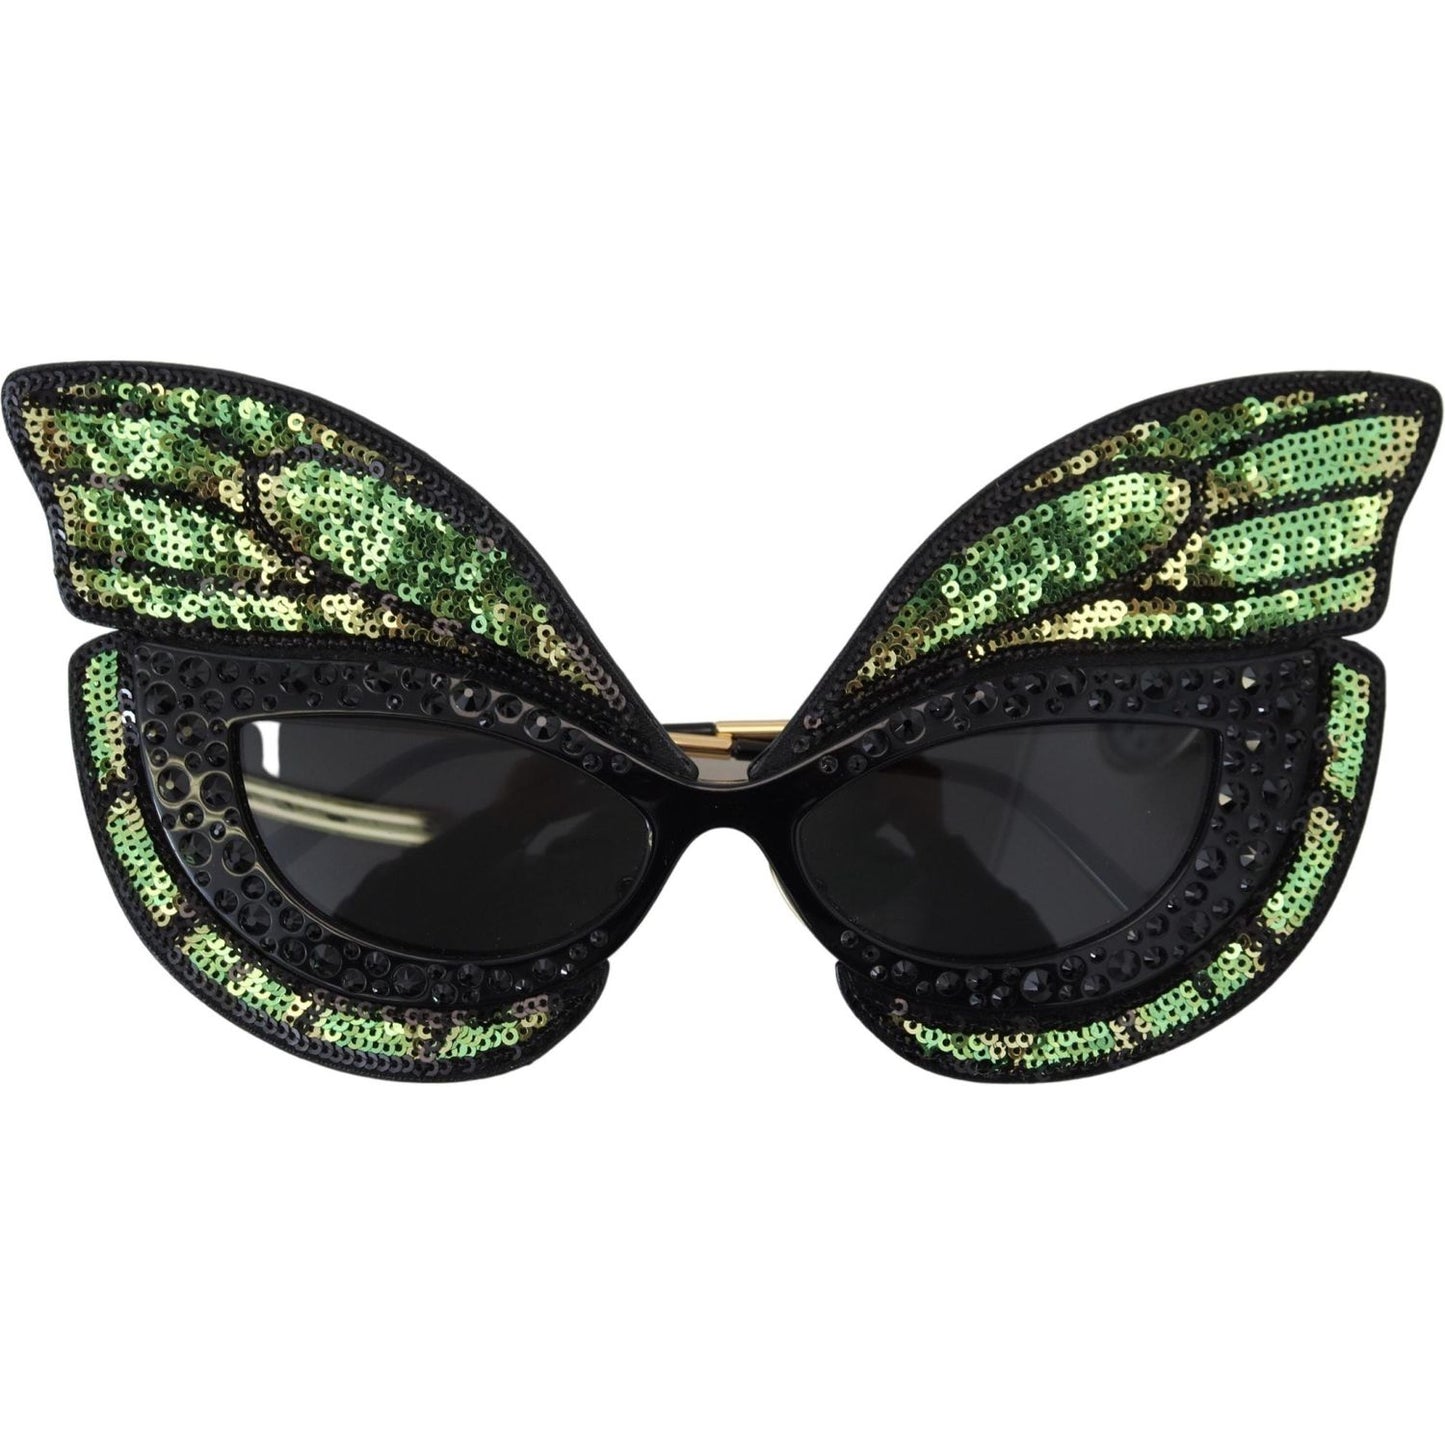 Dolce & Gabbana Exquisite Sequined Butterfly Sunglasses exquisite-sequined-butterfly-sunglasses IMG_4080-scaled-1b2708b4-969.jpg